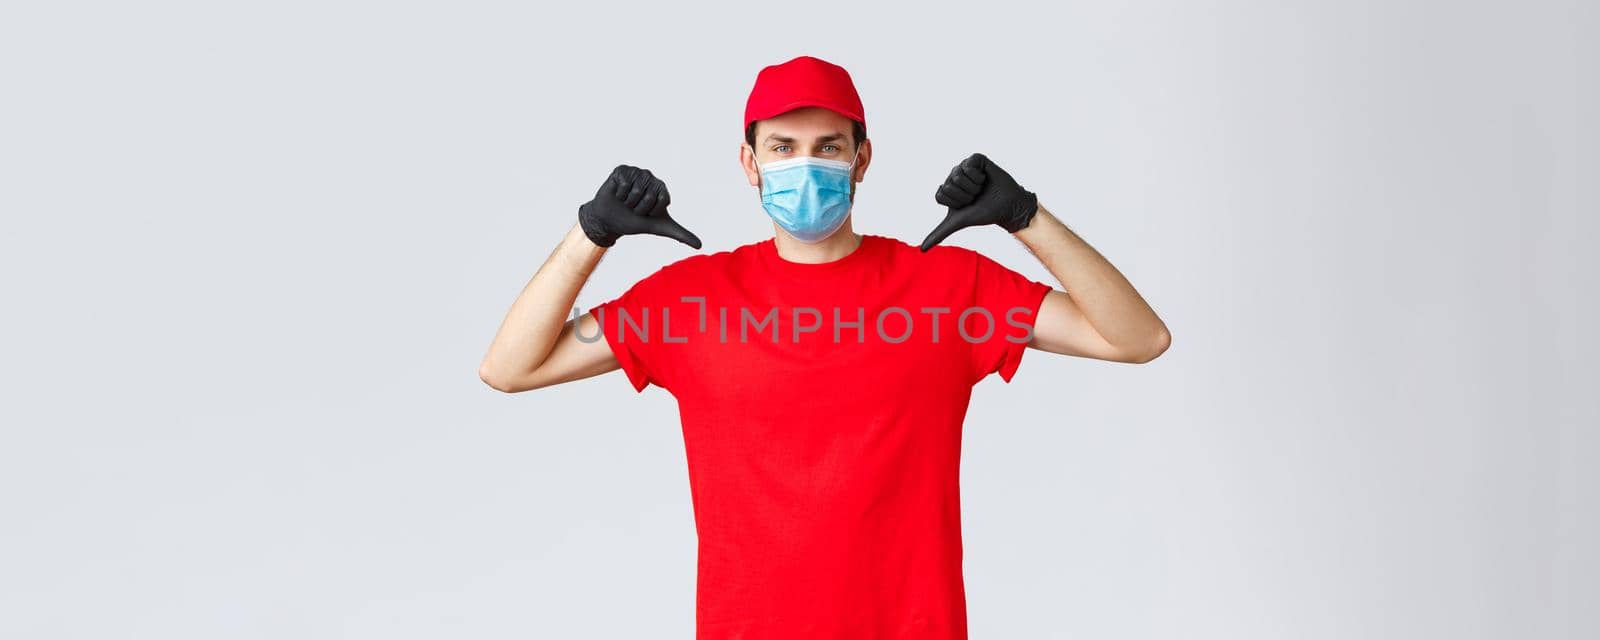 Groceries and packages delivery, covid-19, quarantine and shopping concept. Confident serious courier in red uniform, face mask and gloves assure delivery service quality, pointing at himself.